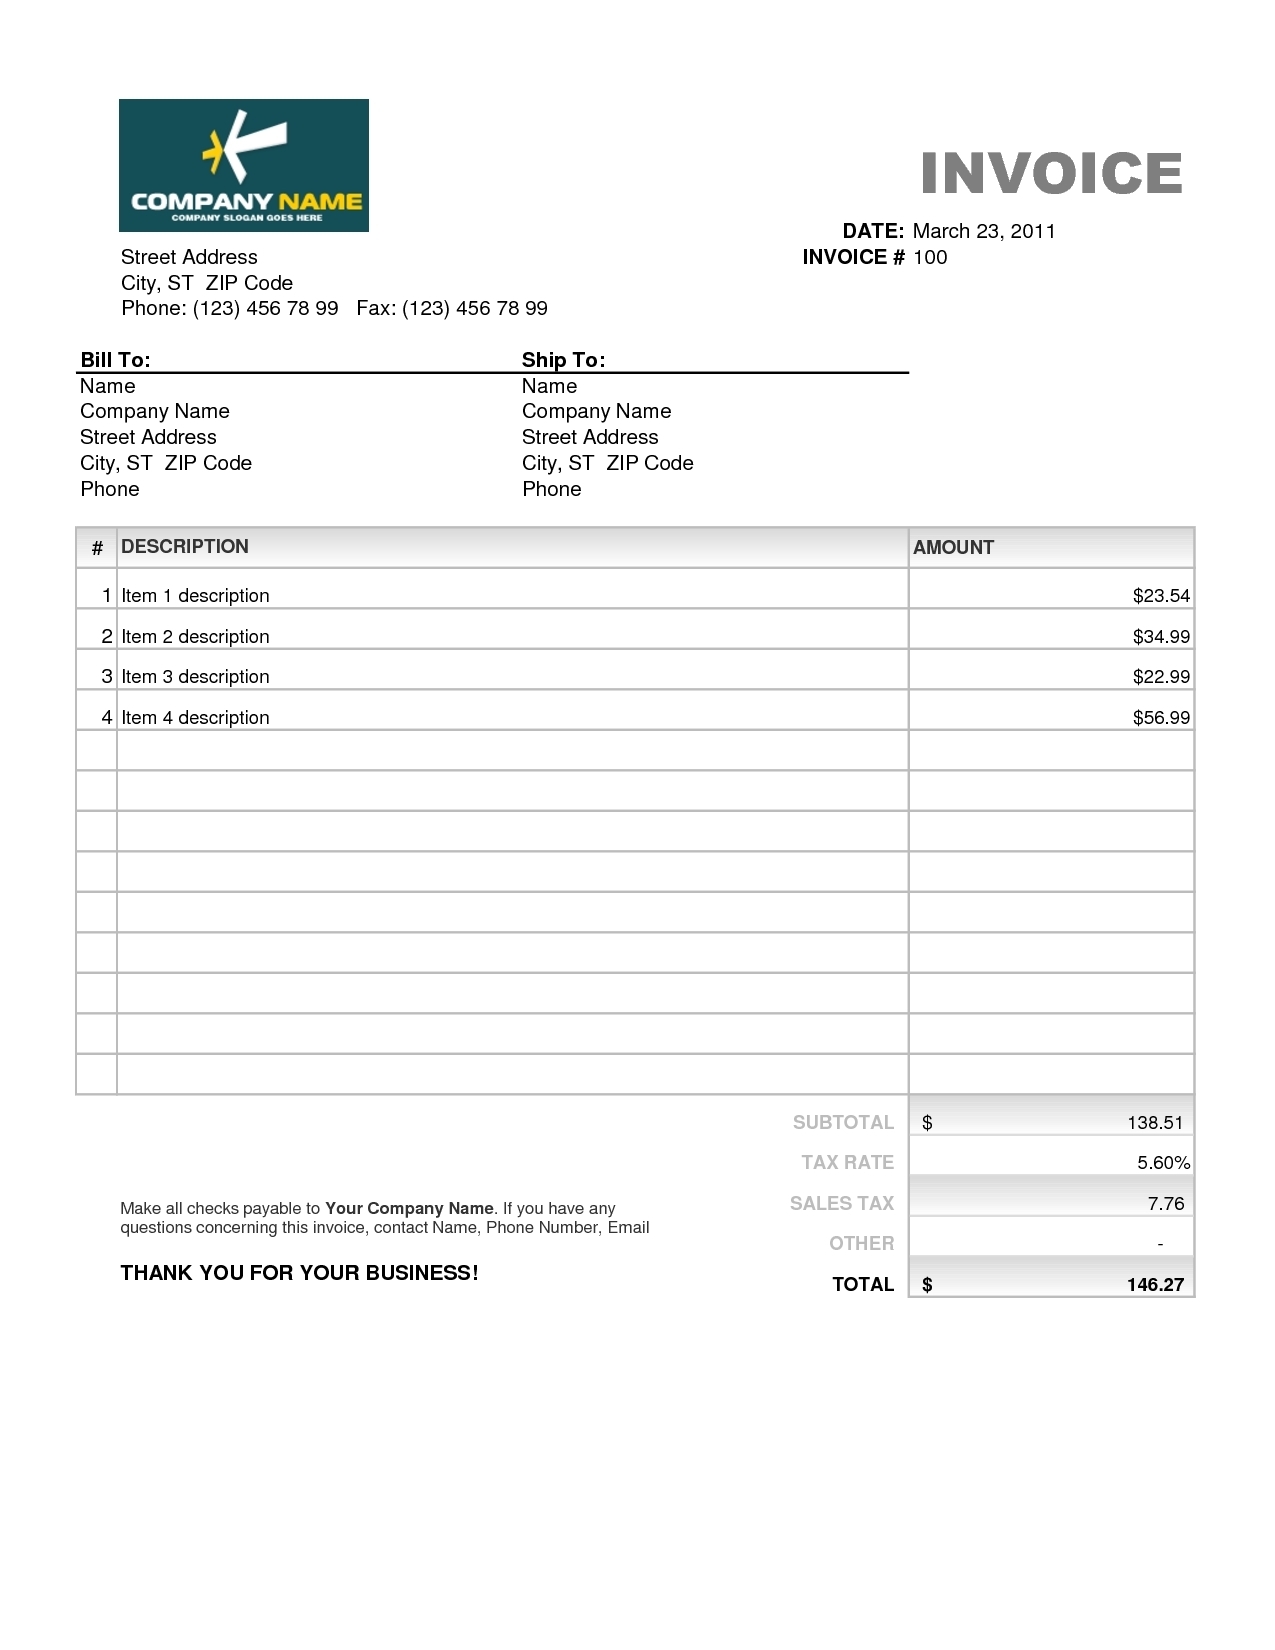 invoice excel template free download invoice template free 2016 invoice templates free download